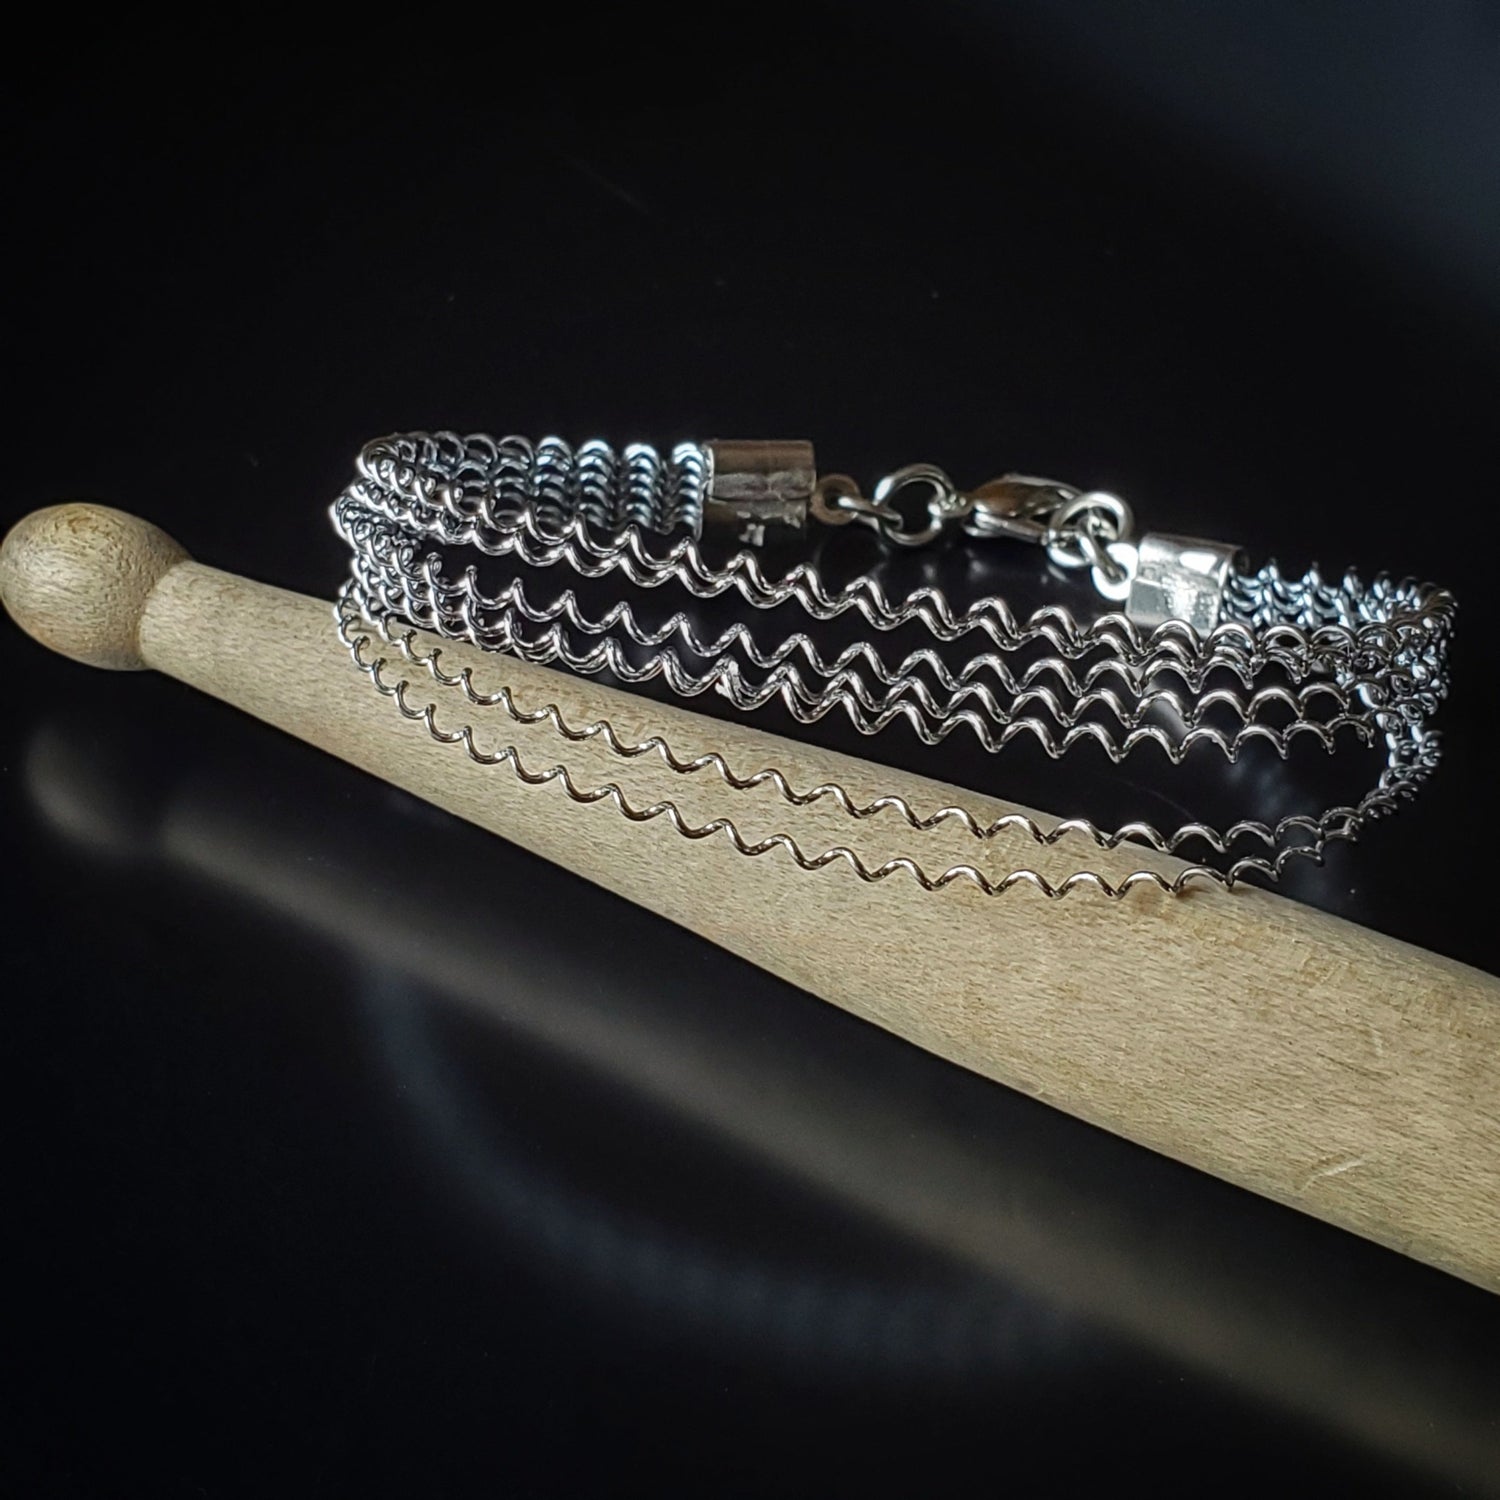 silver coloured clasp style bracelet made from a series of upcycled snare drum strings - bracelet is sitting on a drumstick